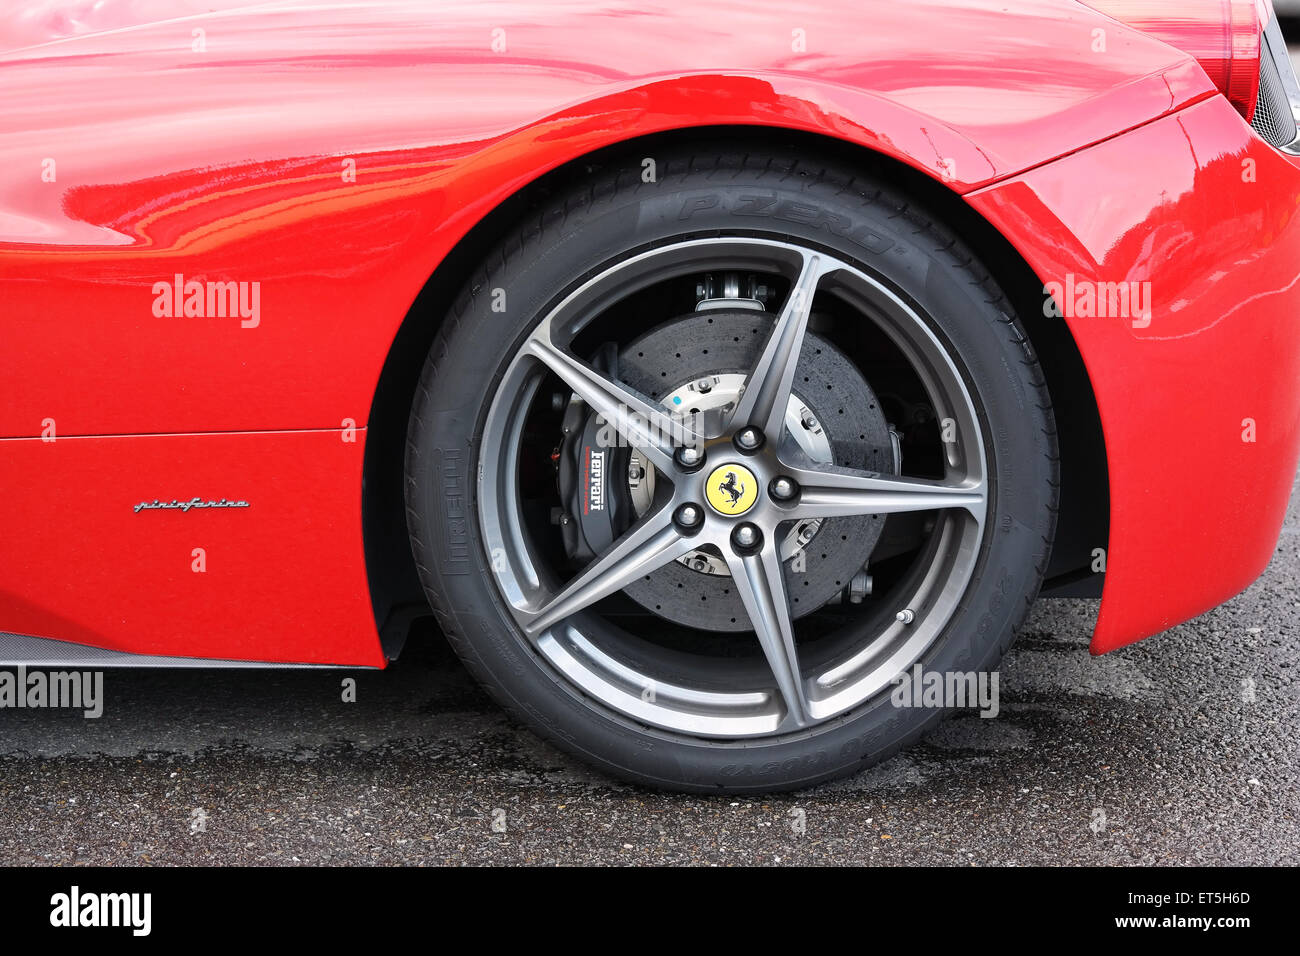 FRANCORCHAMPS, BELGIUM - MAY 2015: Close-up of a wheel with carbon ceramics brake of a Ferrari sportscar designed by Pininfarina Stock Photo